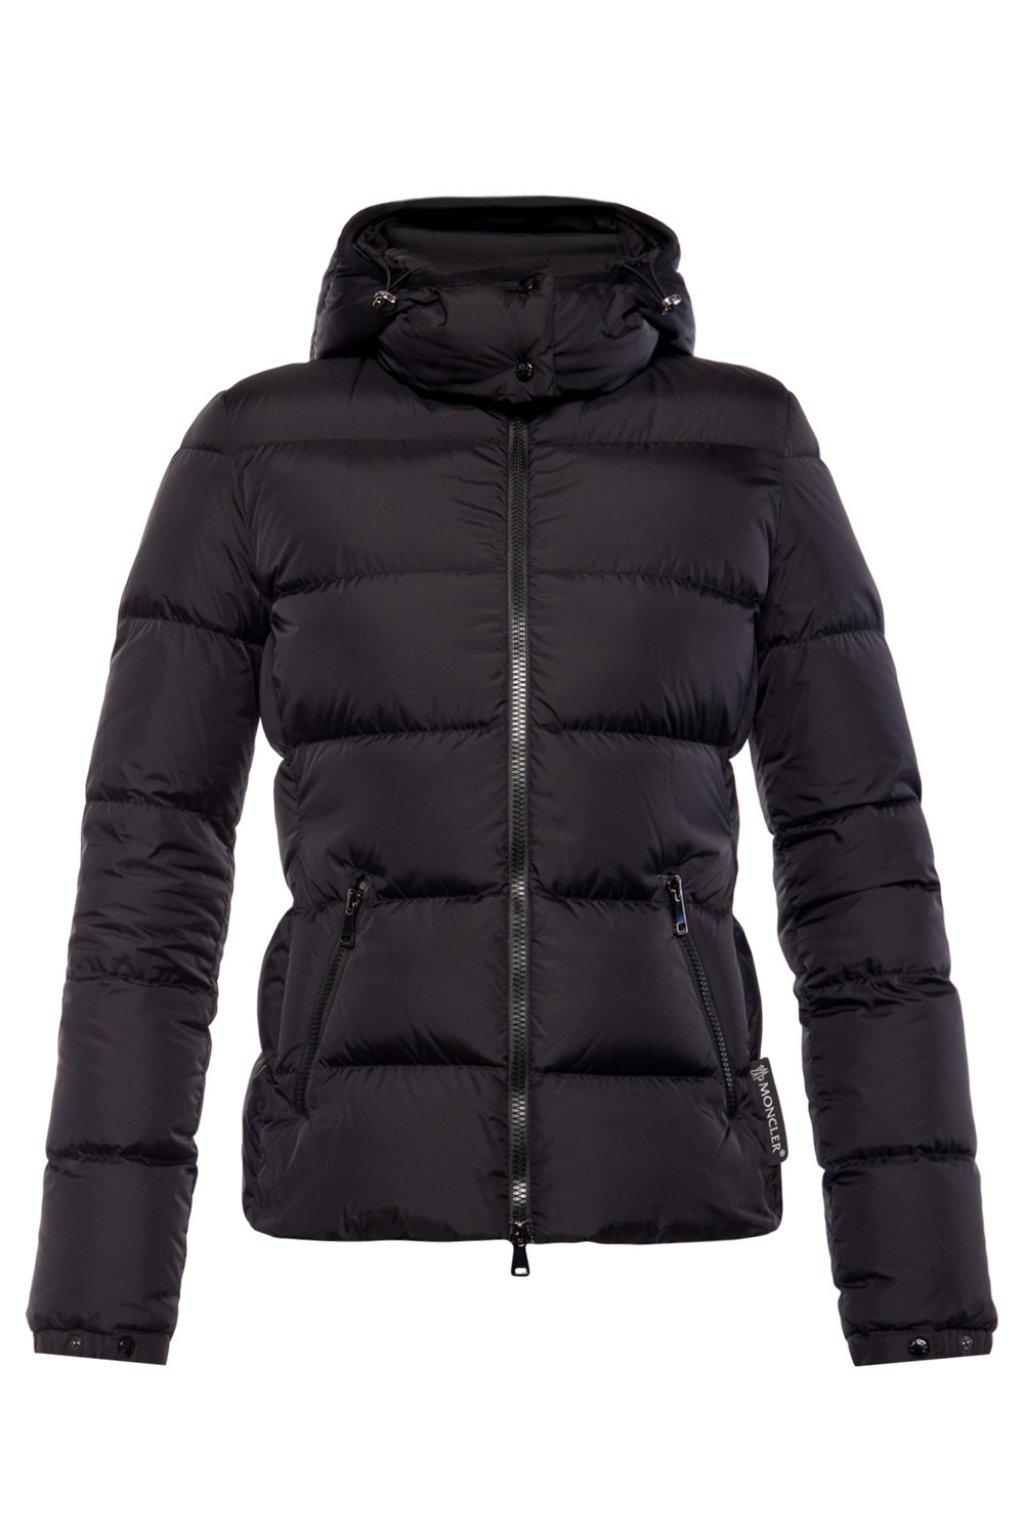 Moncler Synthetic 'don Giubbotto' Quilted Jacket Black - Lyst